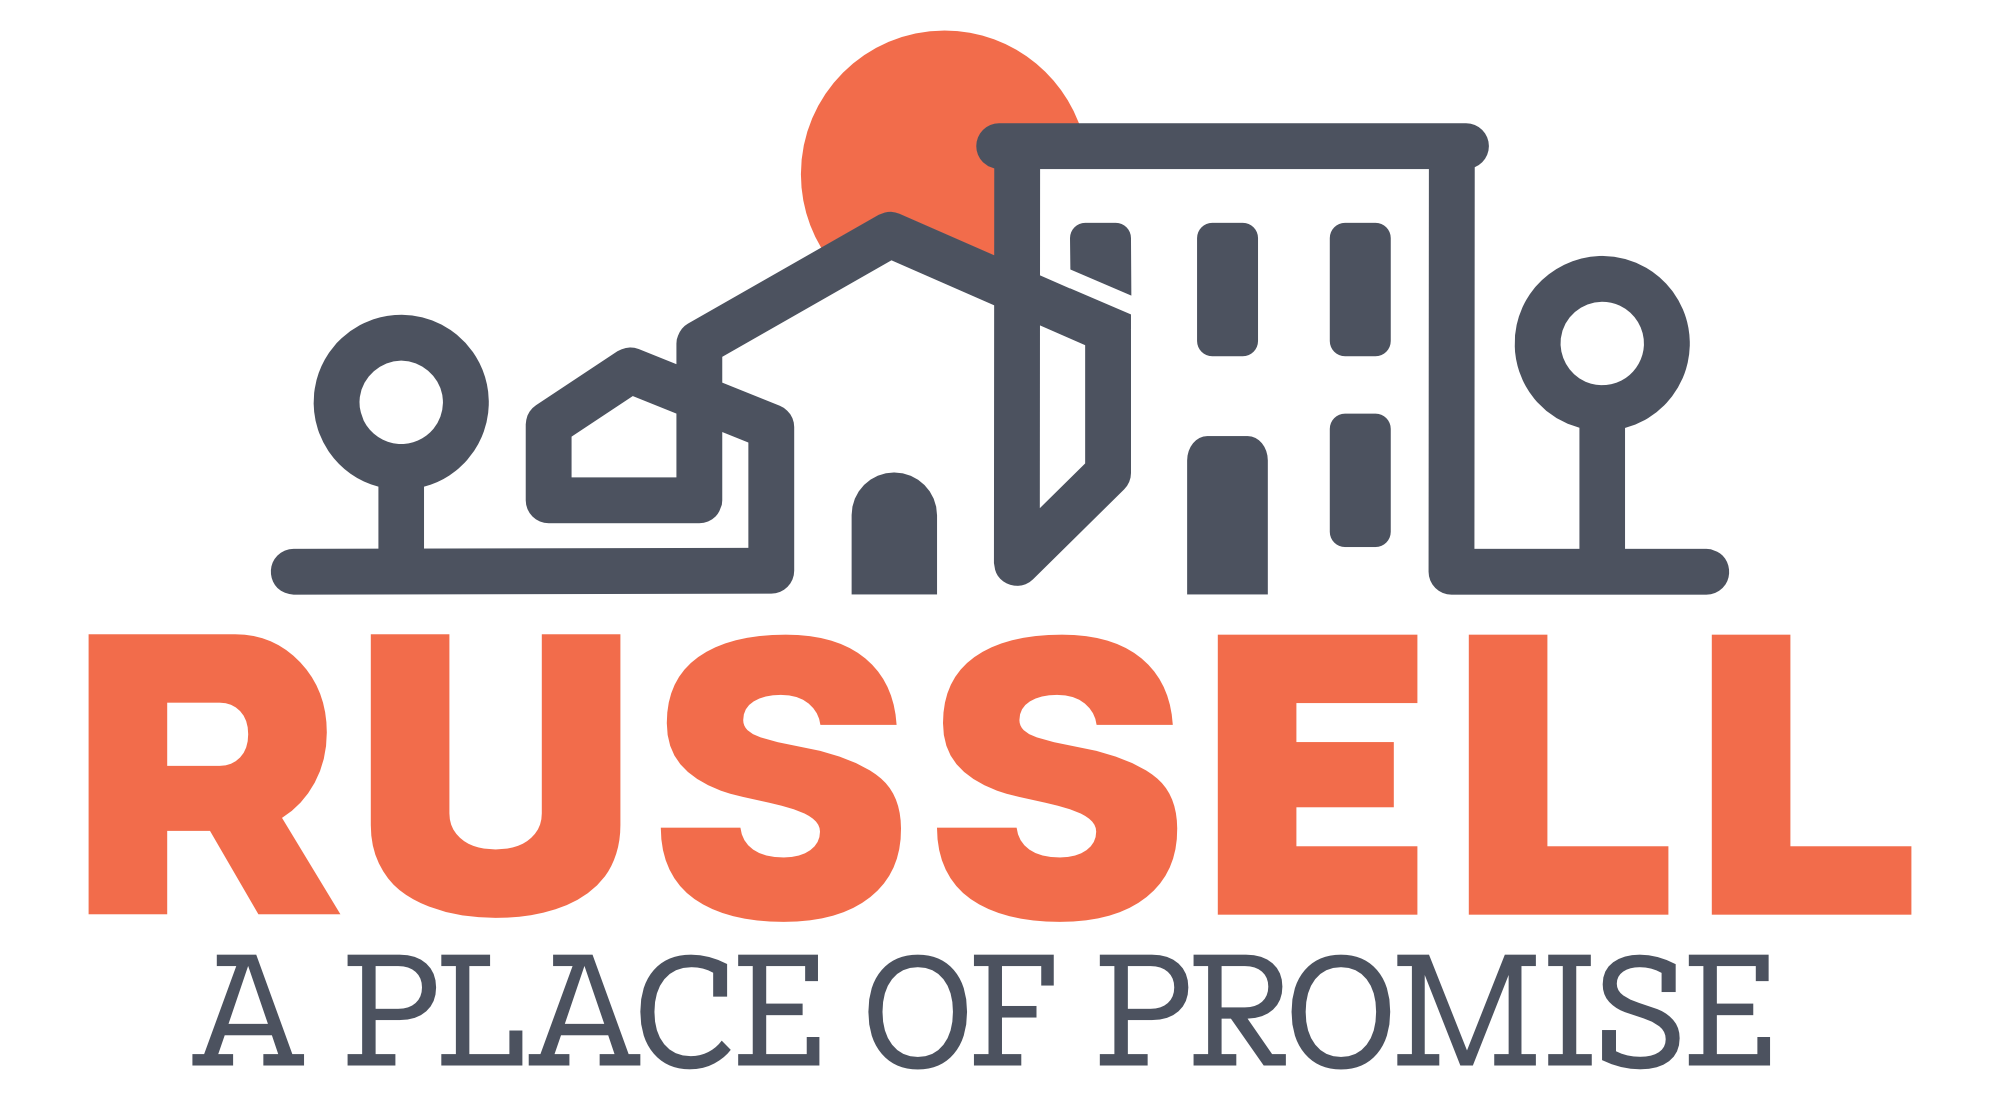 Russell: A Place of Promise